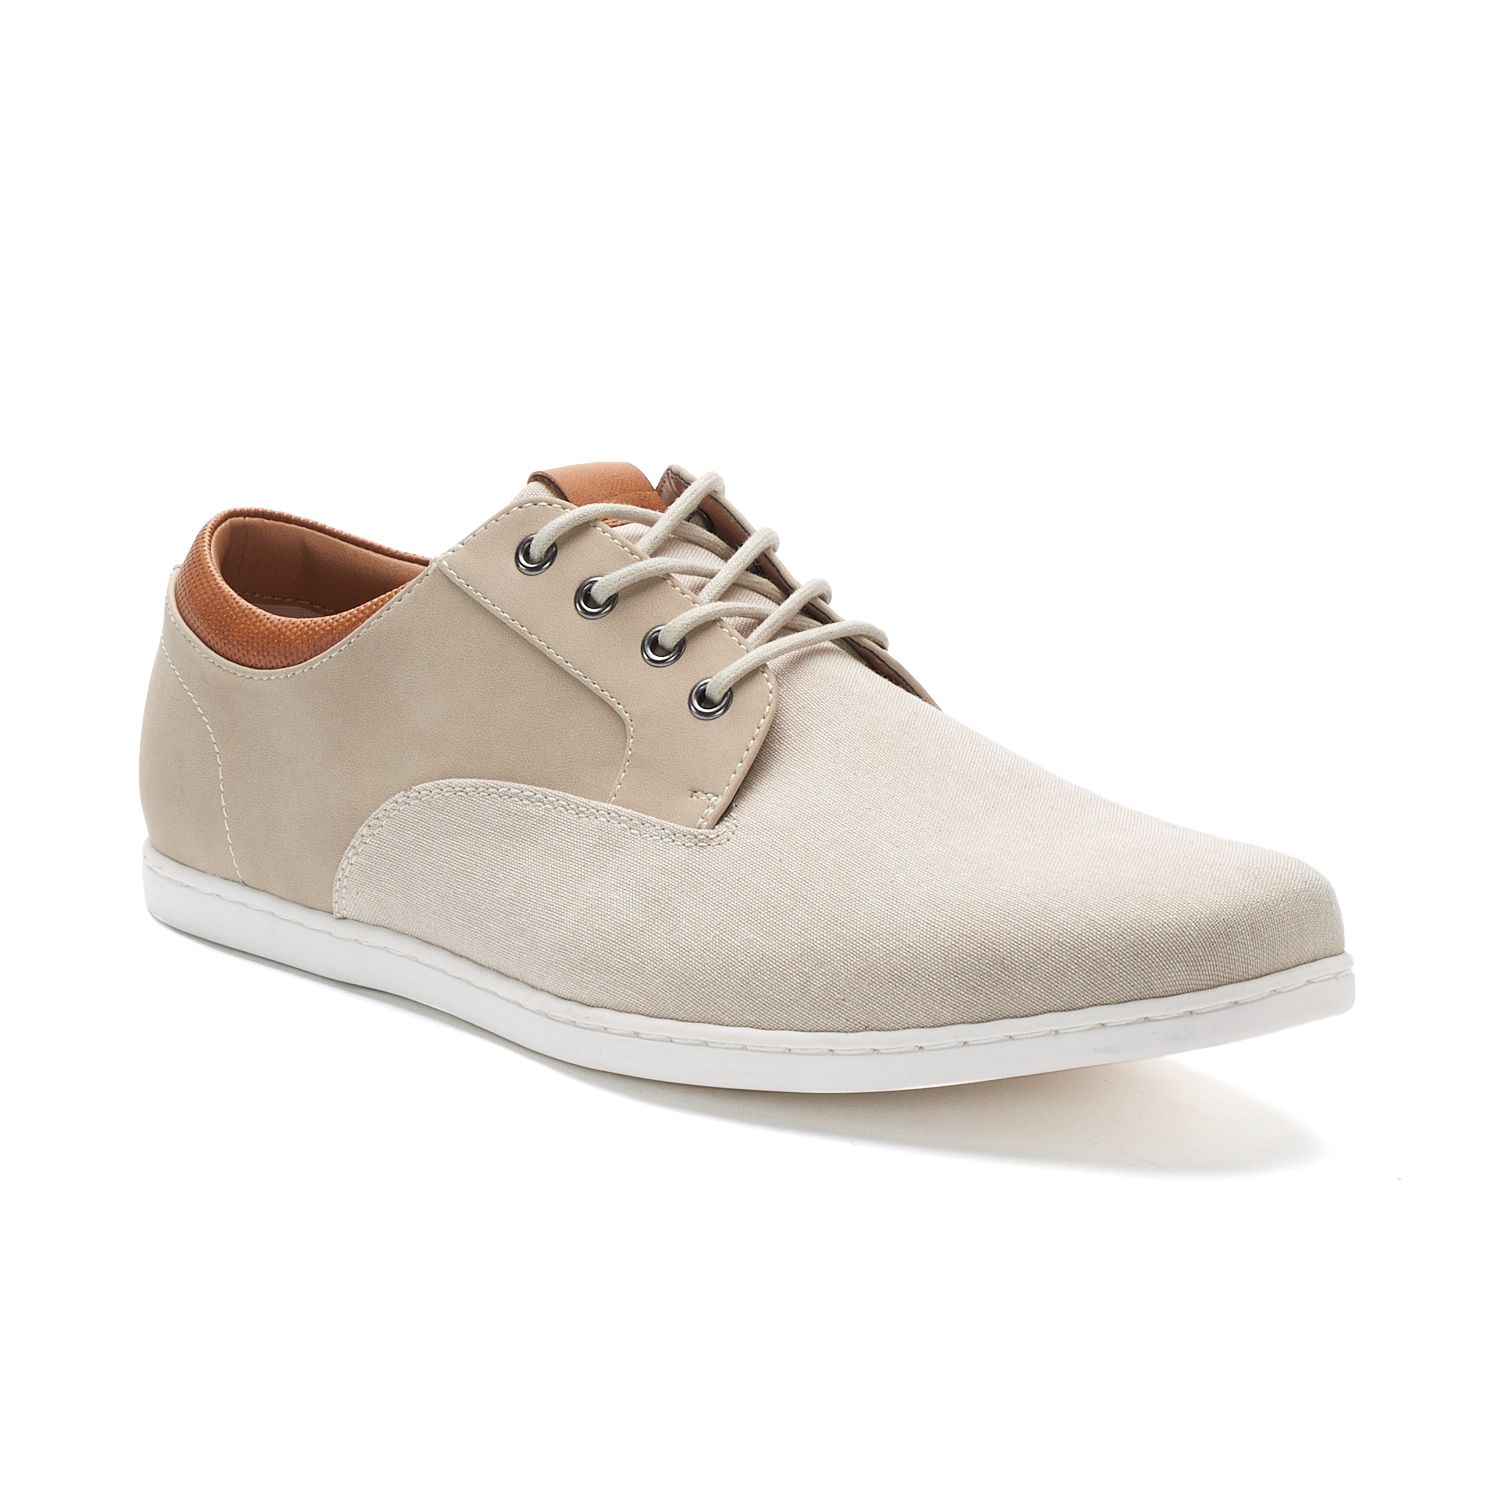 Lyden Men's Casual Oxford Shoes